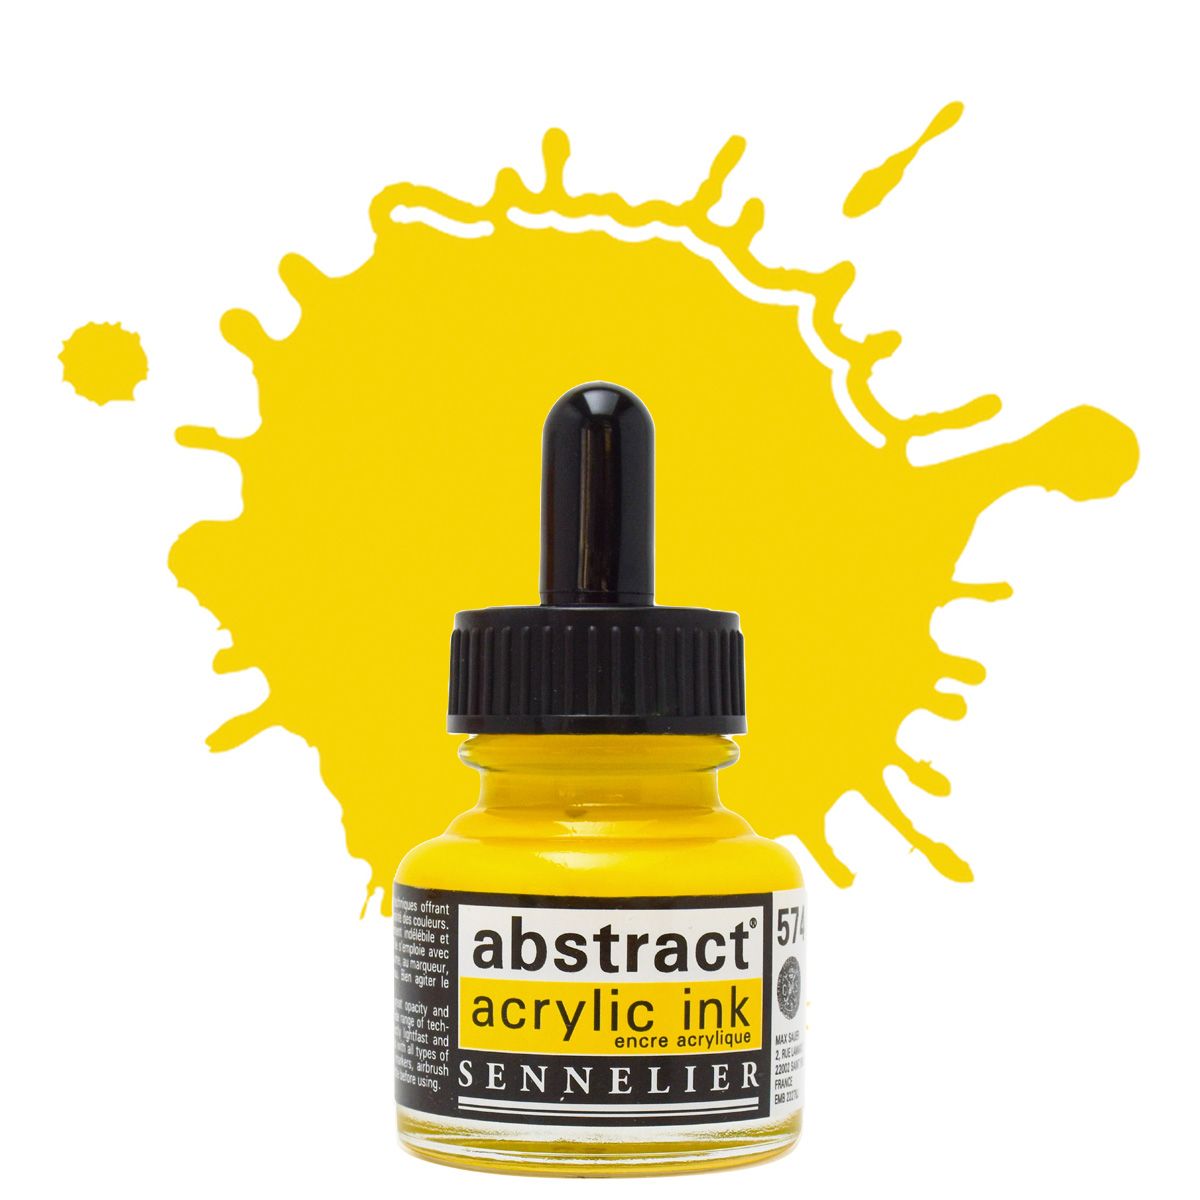 Sennelier Abstract Acrylic Ink - Primary Yellow, 30ml